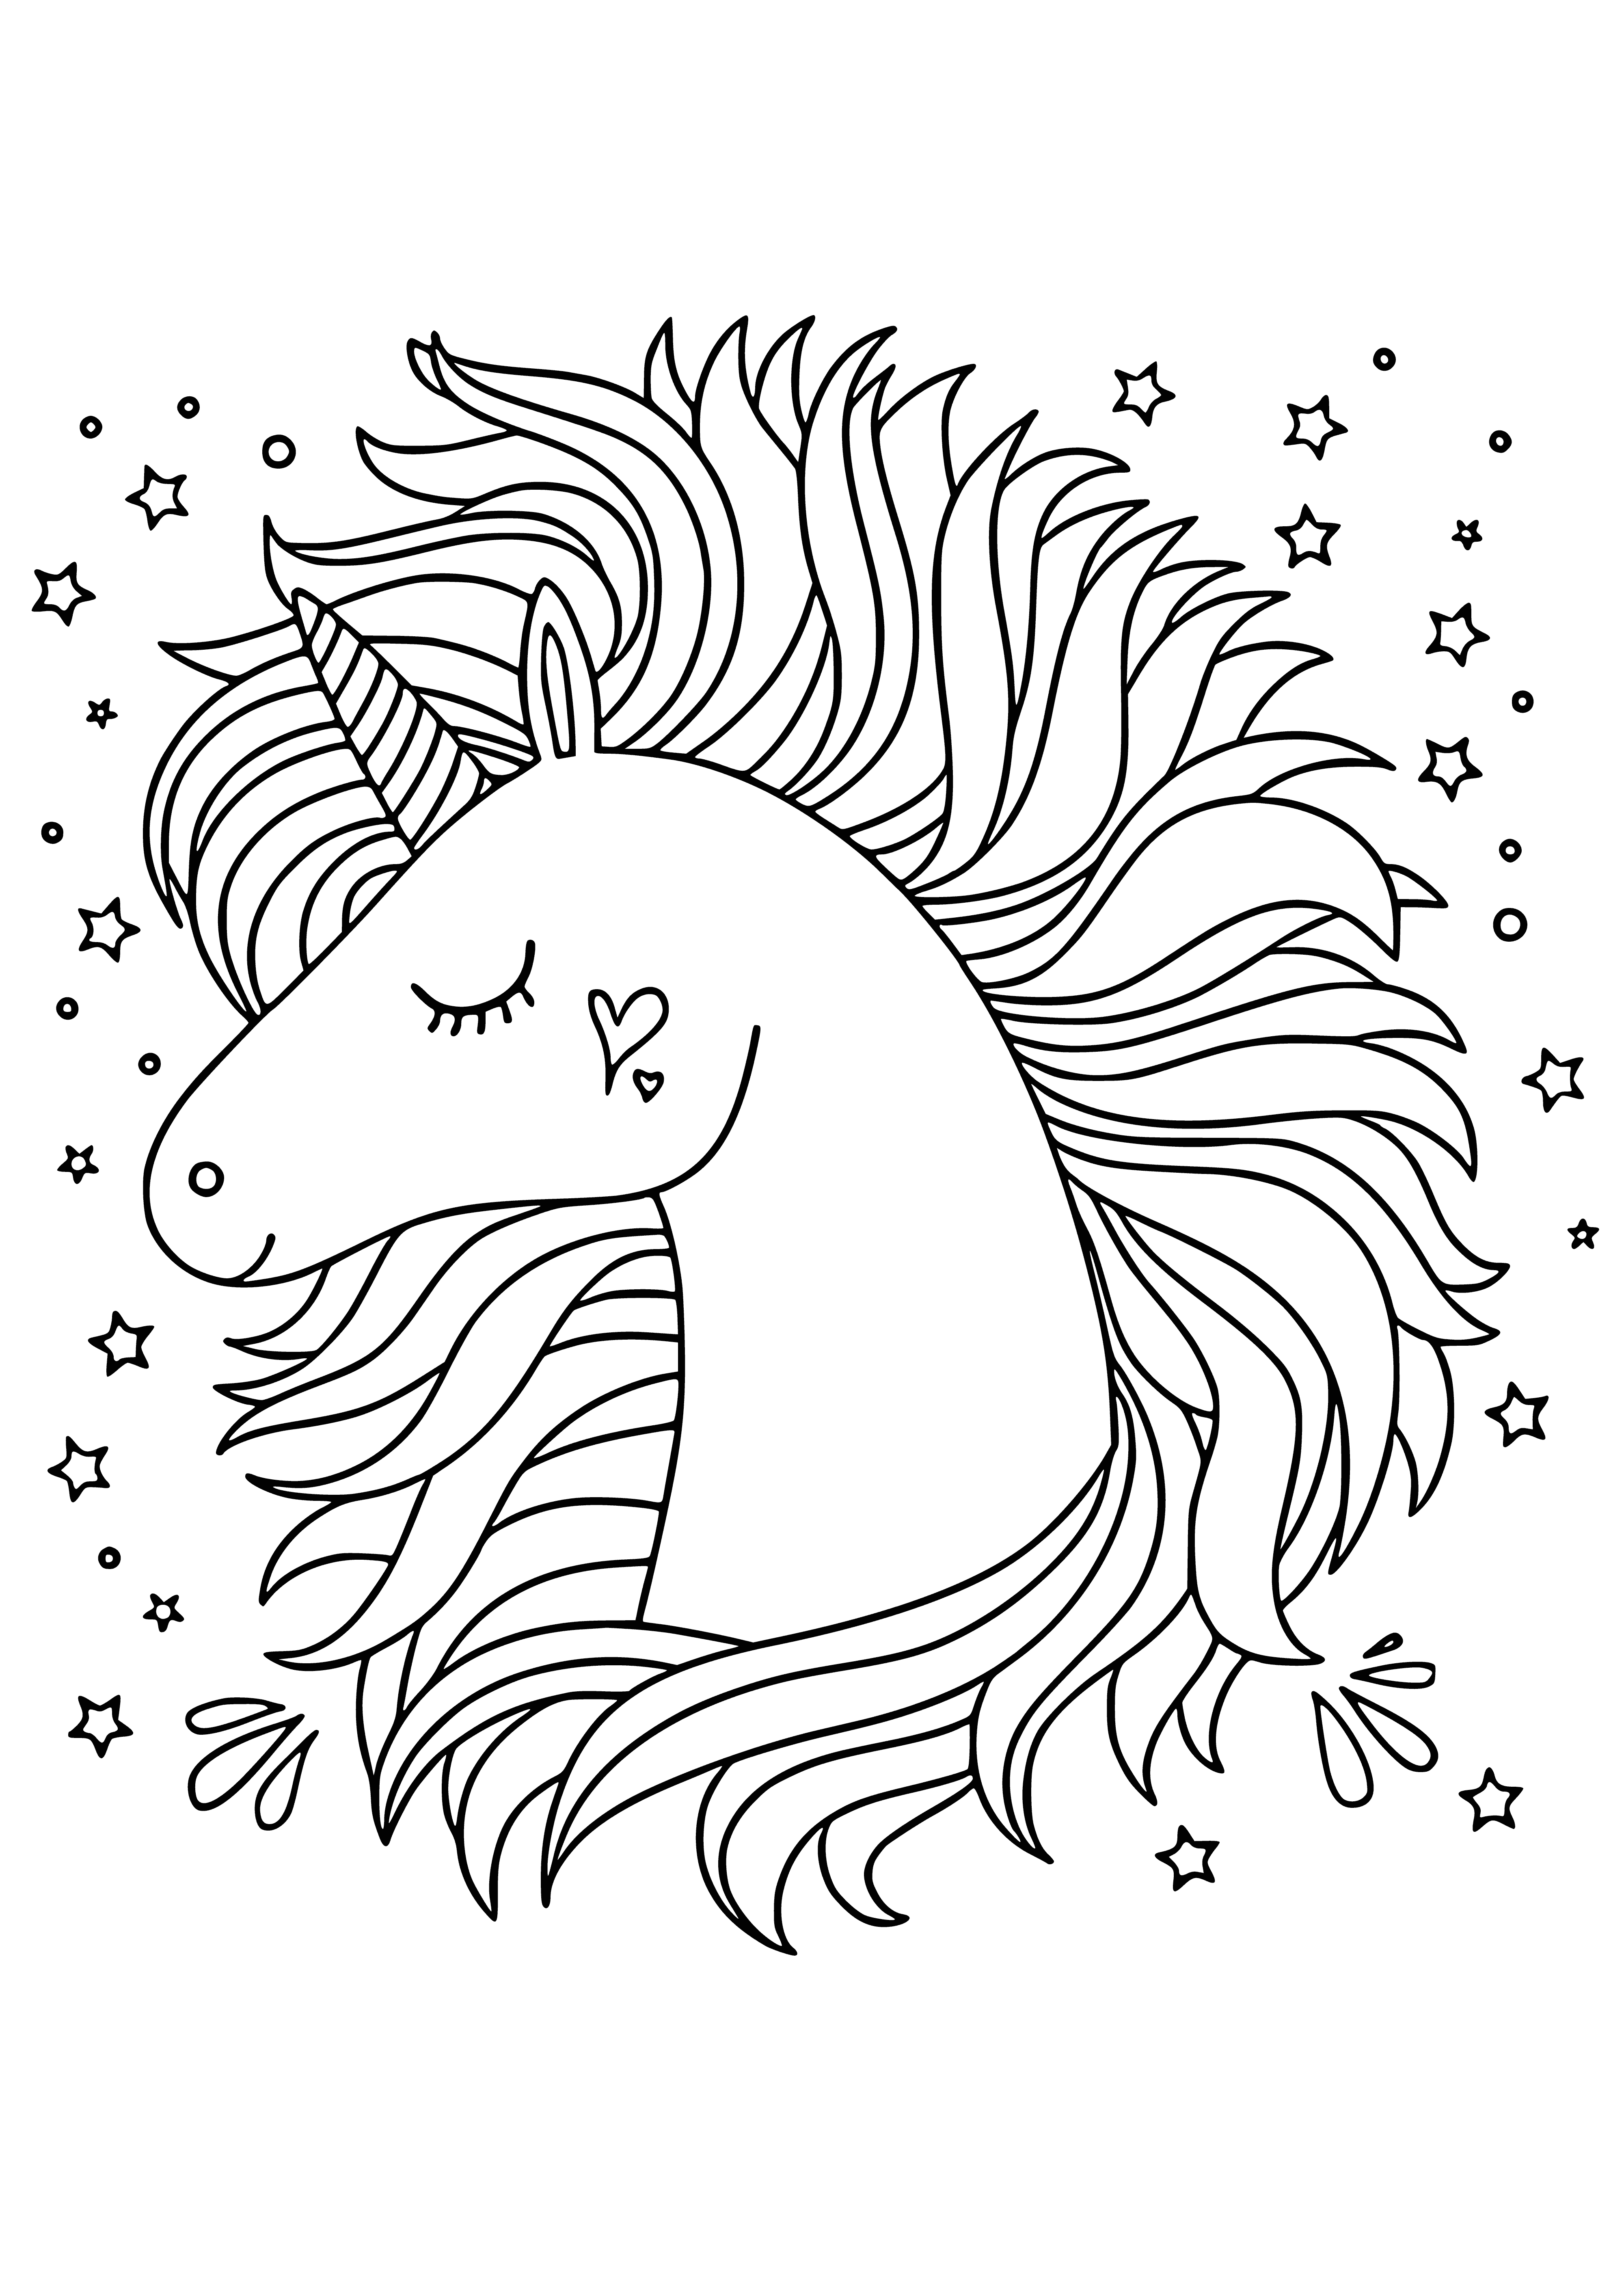 coloring page: White unicorn with blue mane & tail, gold horn & glittery wings, surrounded by stars, hearts & flowers. #AdultColoringPages #AntistressUnicorns